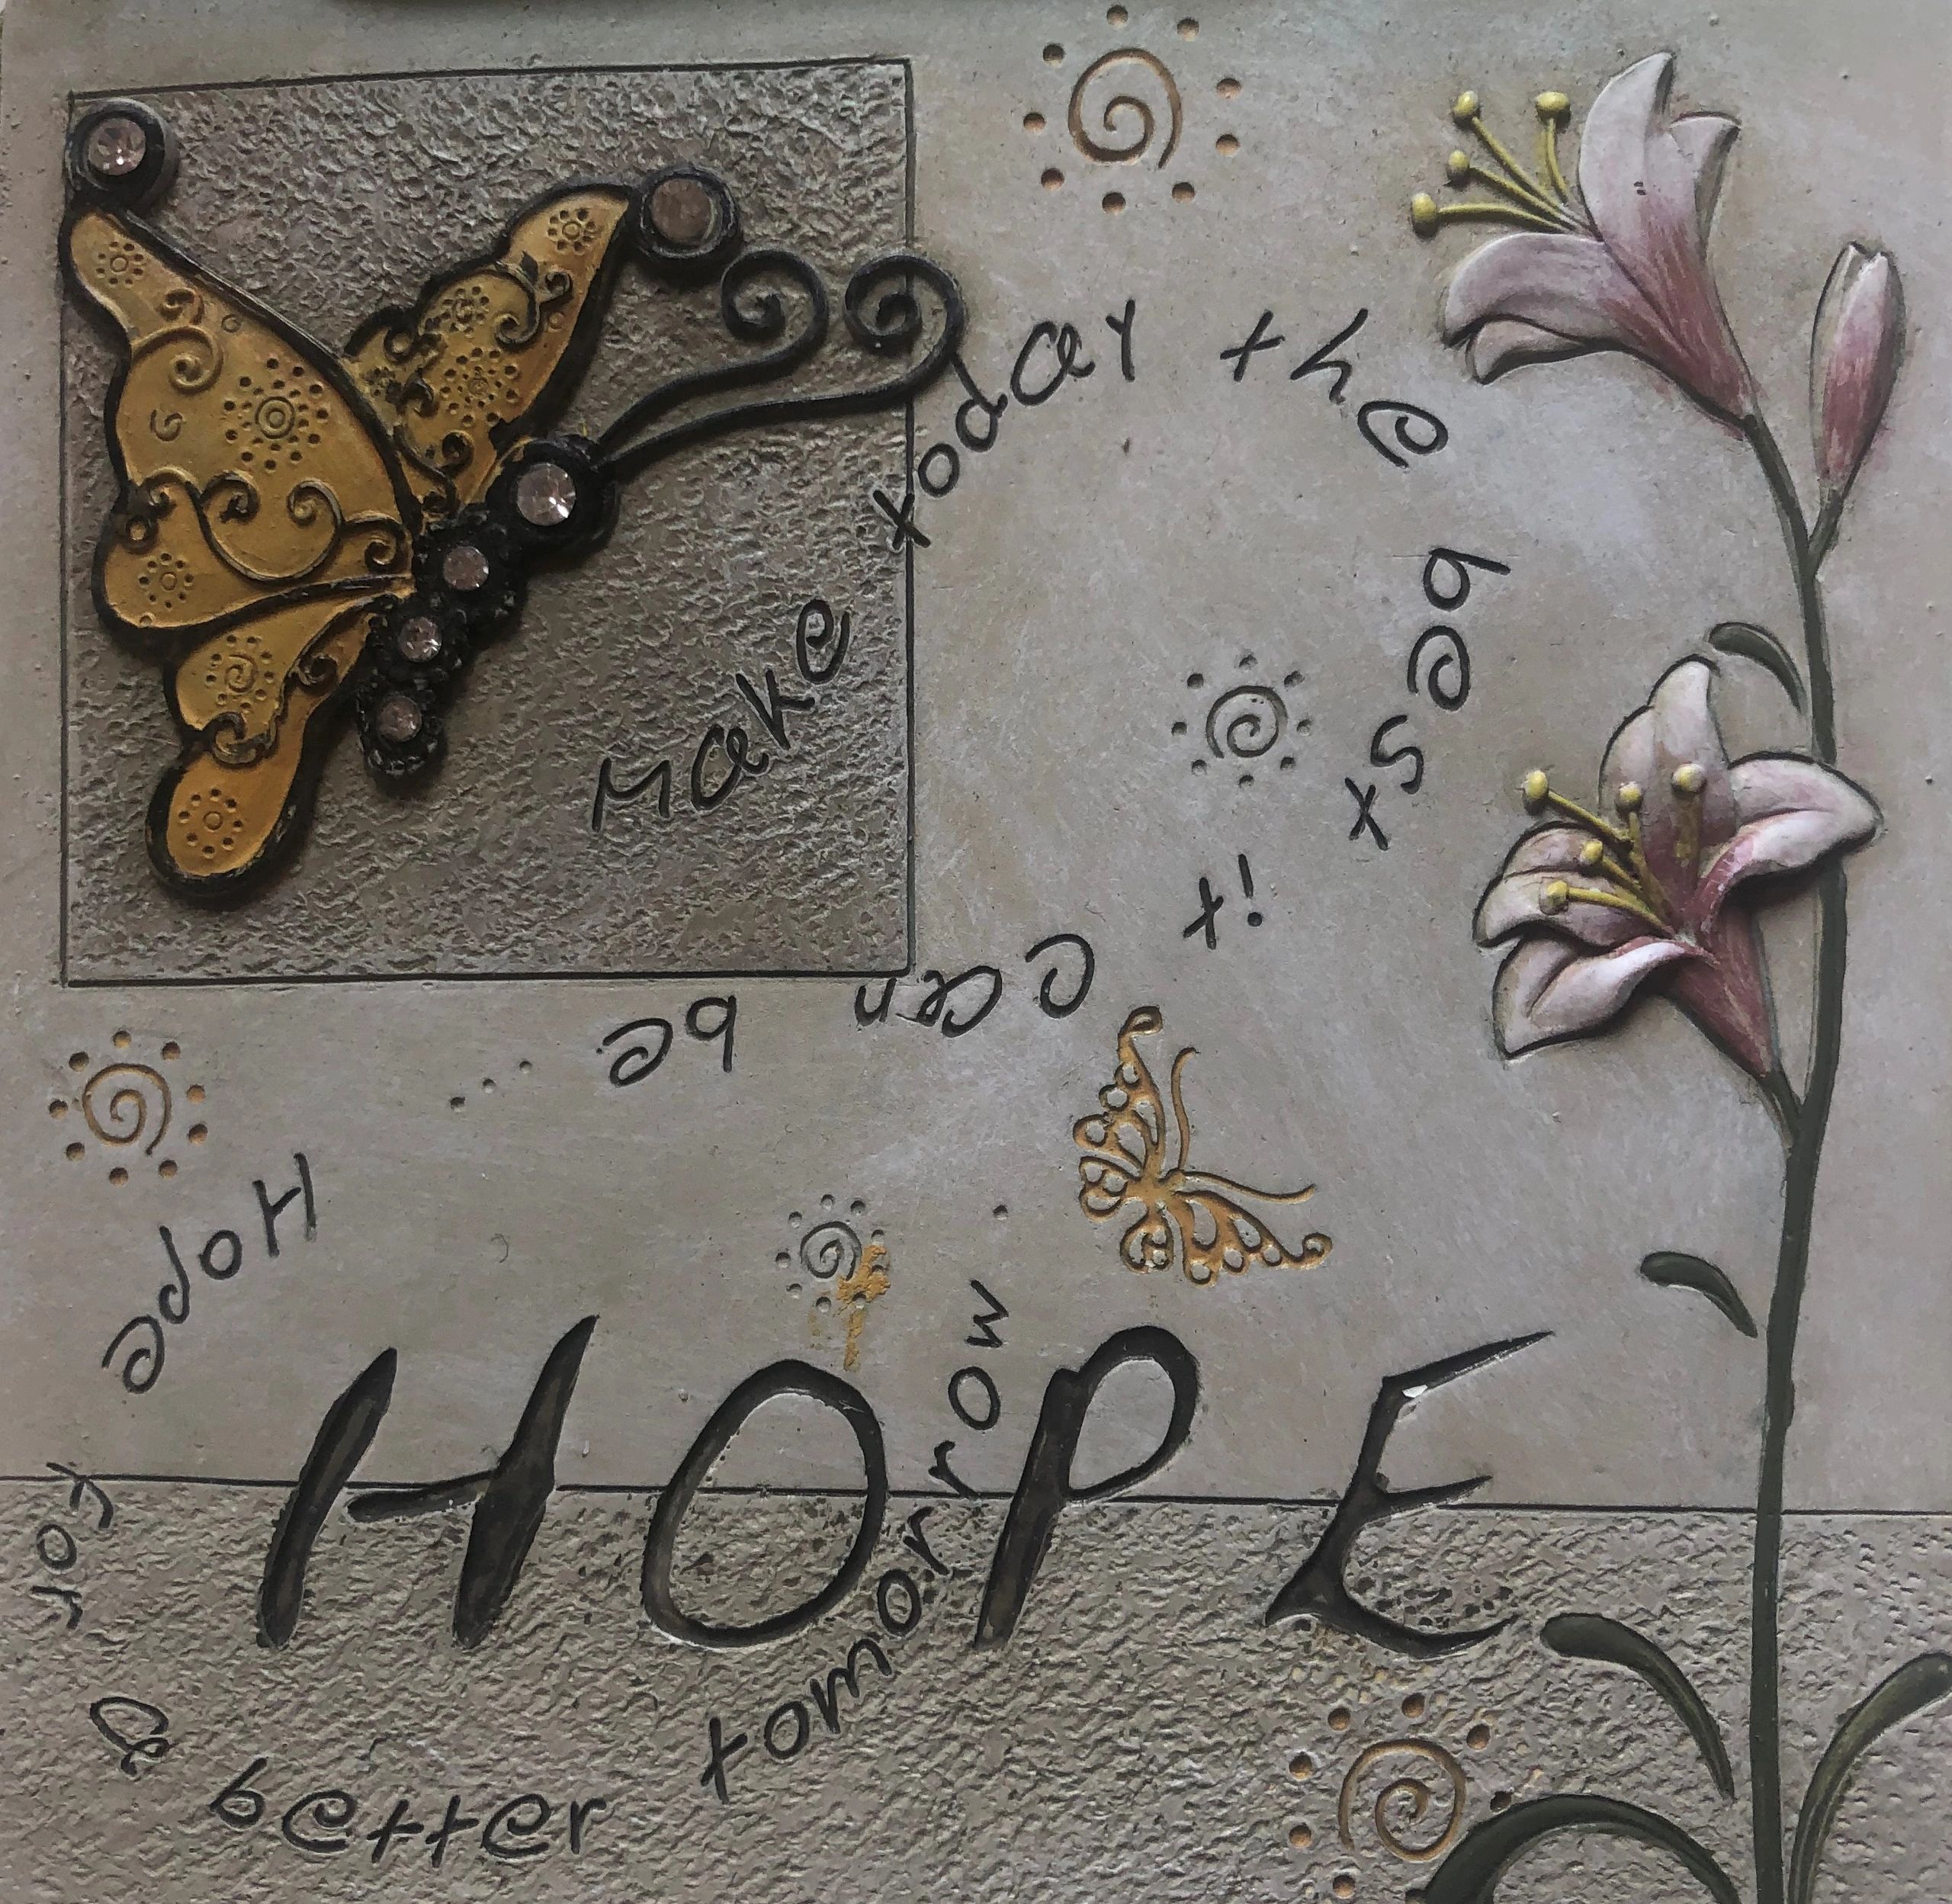 Hope with Hypnotherapy and Counselling
Make today the best it can be ... Hope for a better tomorrow